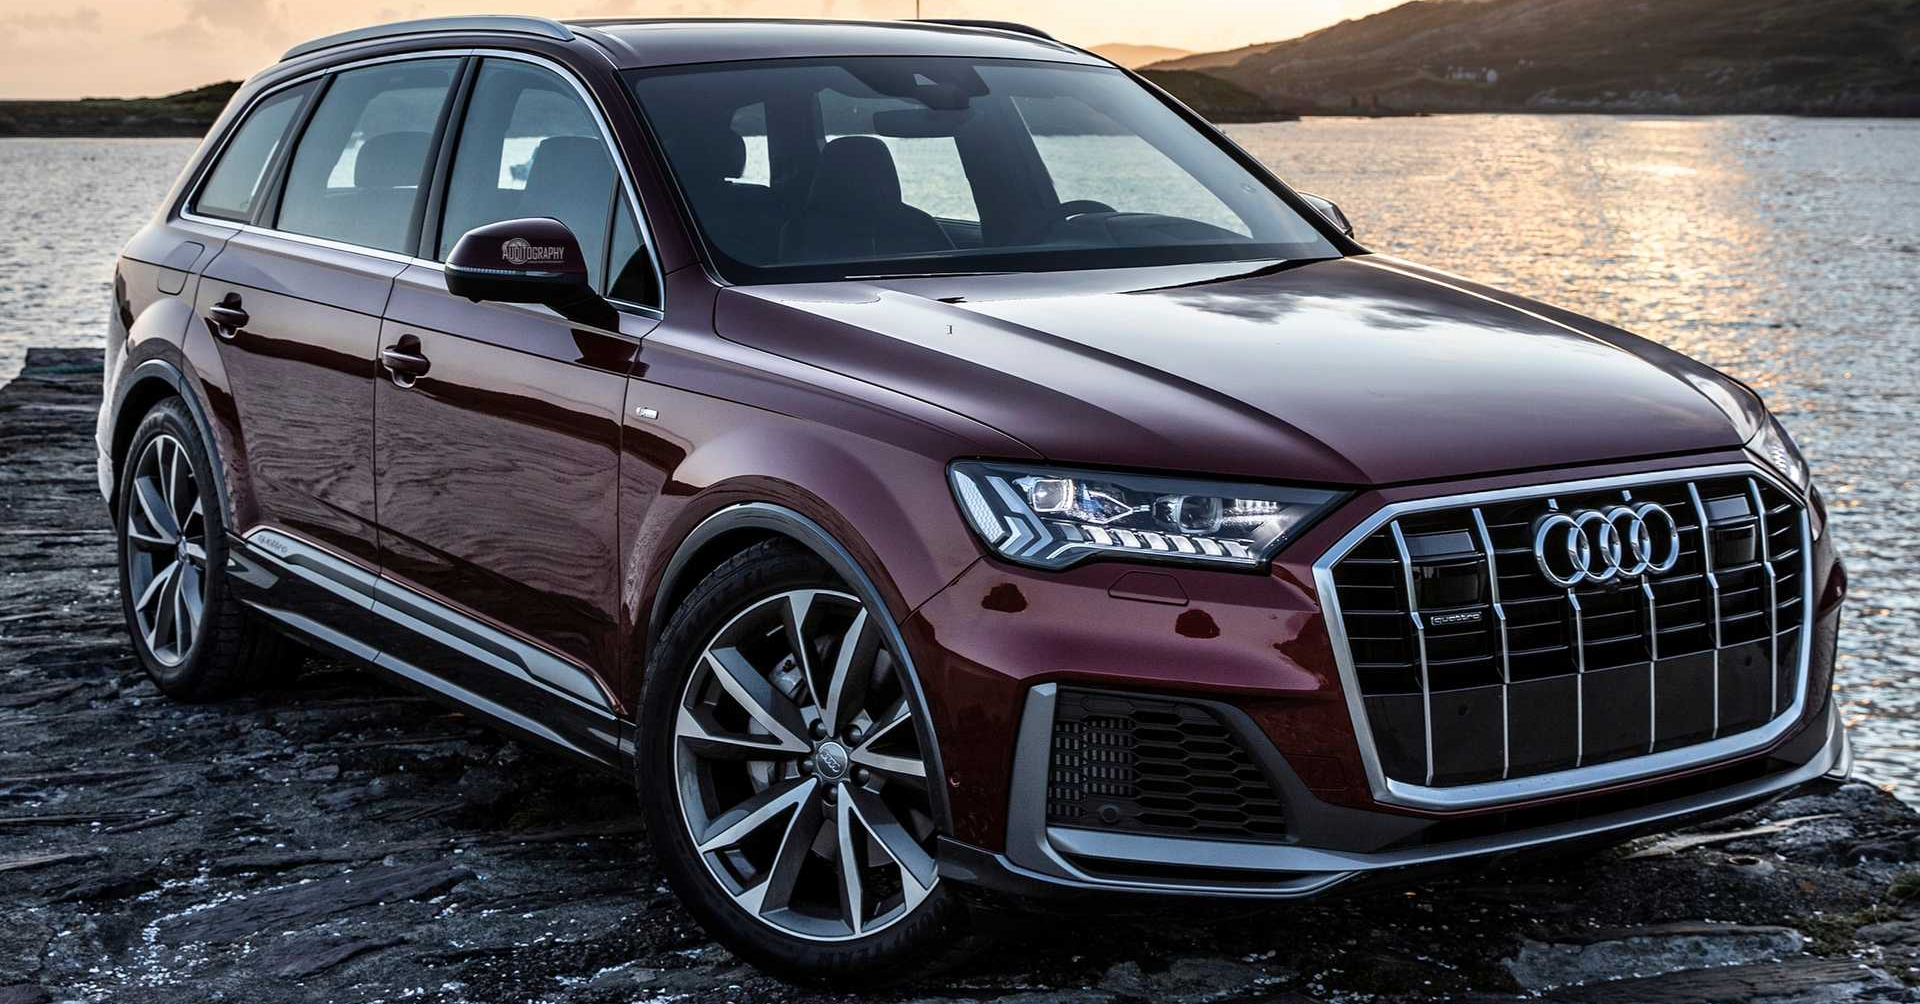 The Audi Q7 Flies the Flag High for Luxury